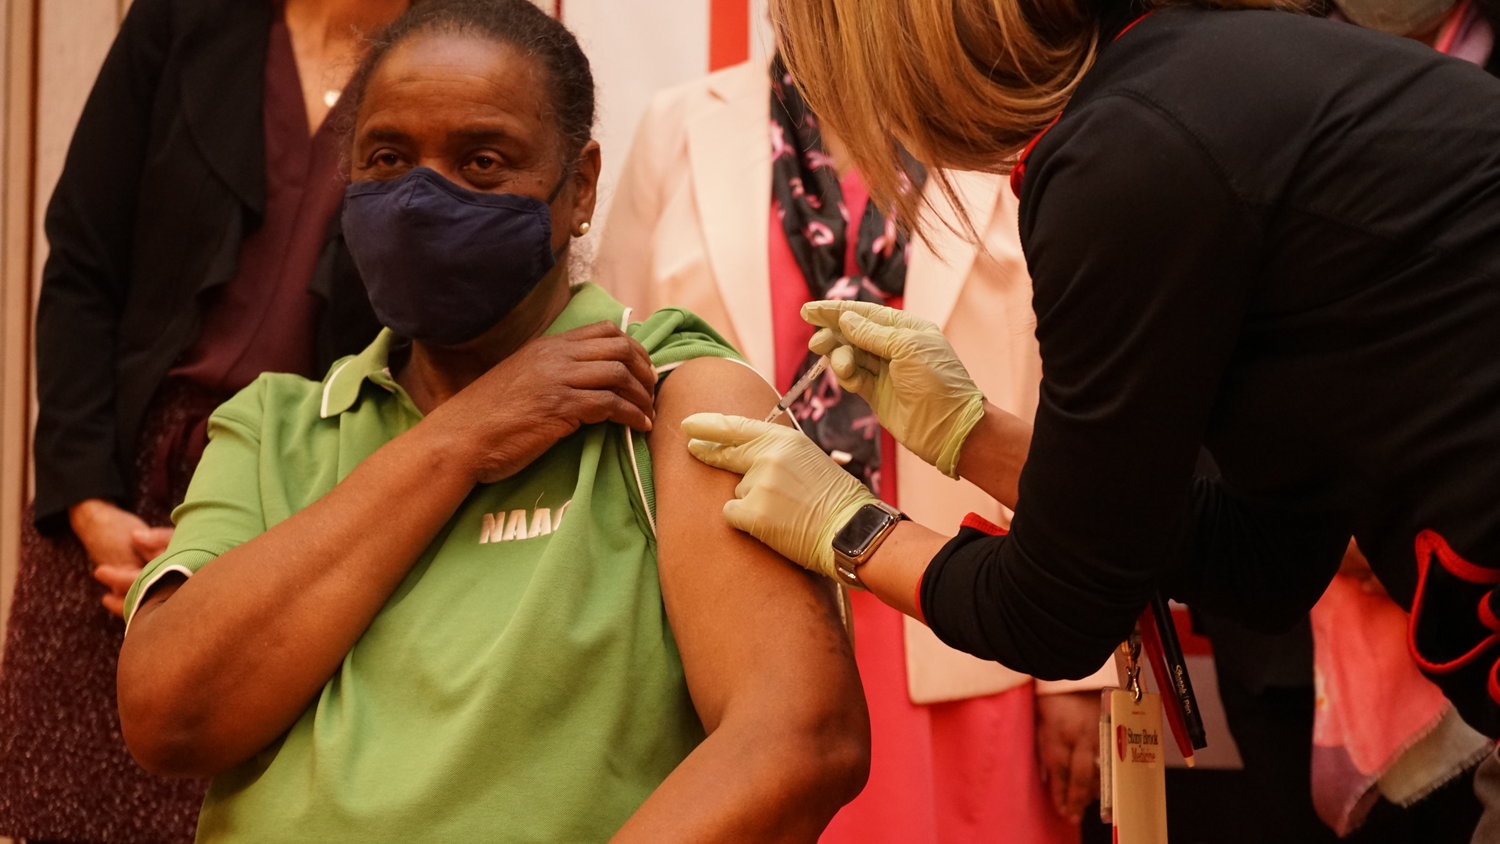 Doris Hicks, president of the Lakeview branch of the NAACP, received her first dose of the coronavirus vaccine at a pop-up vaccination clinic at the Gateway Christian Center in Valley Stream on Feb. 23.